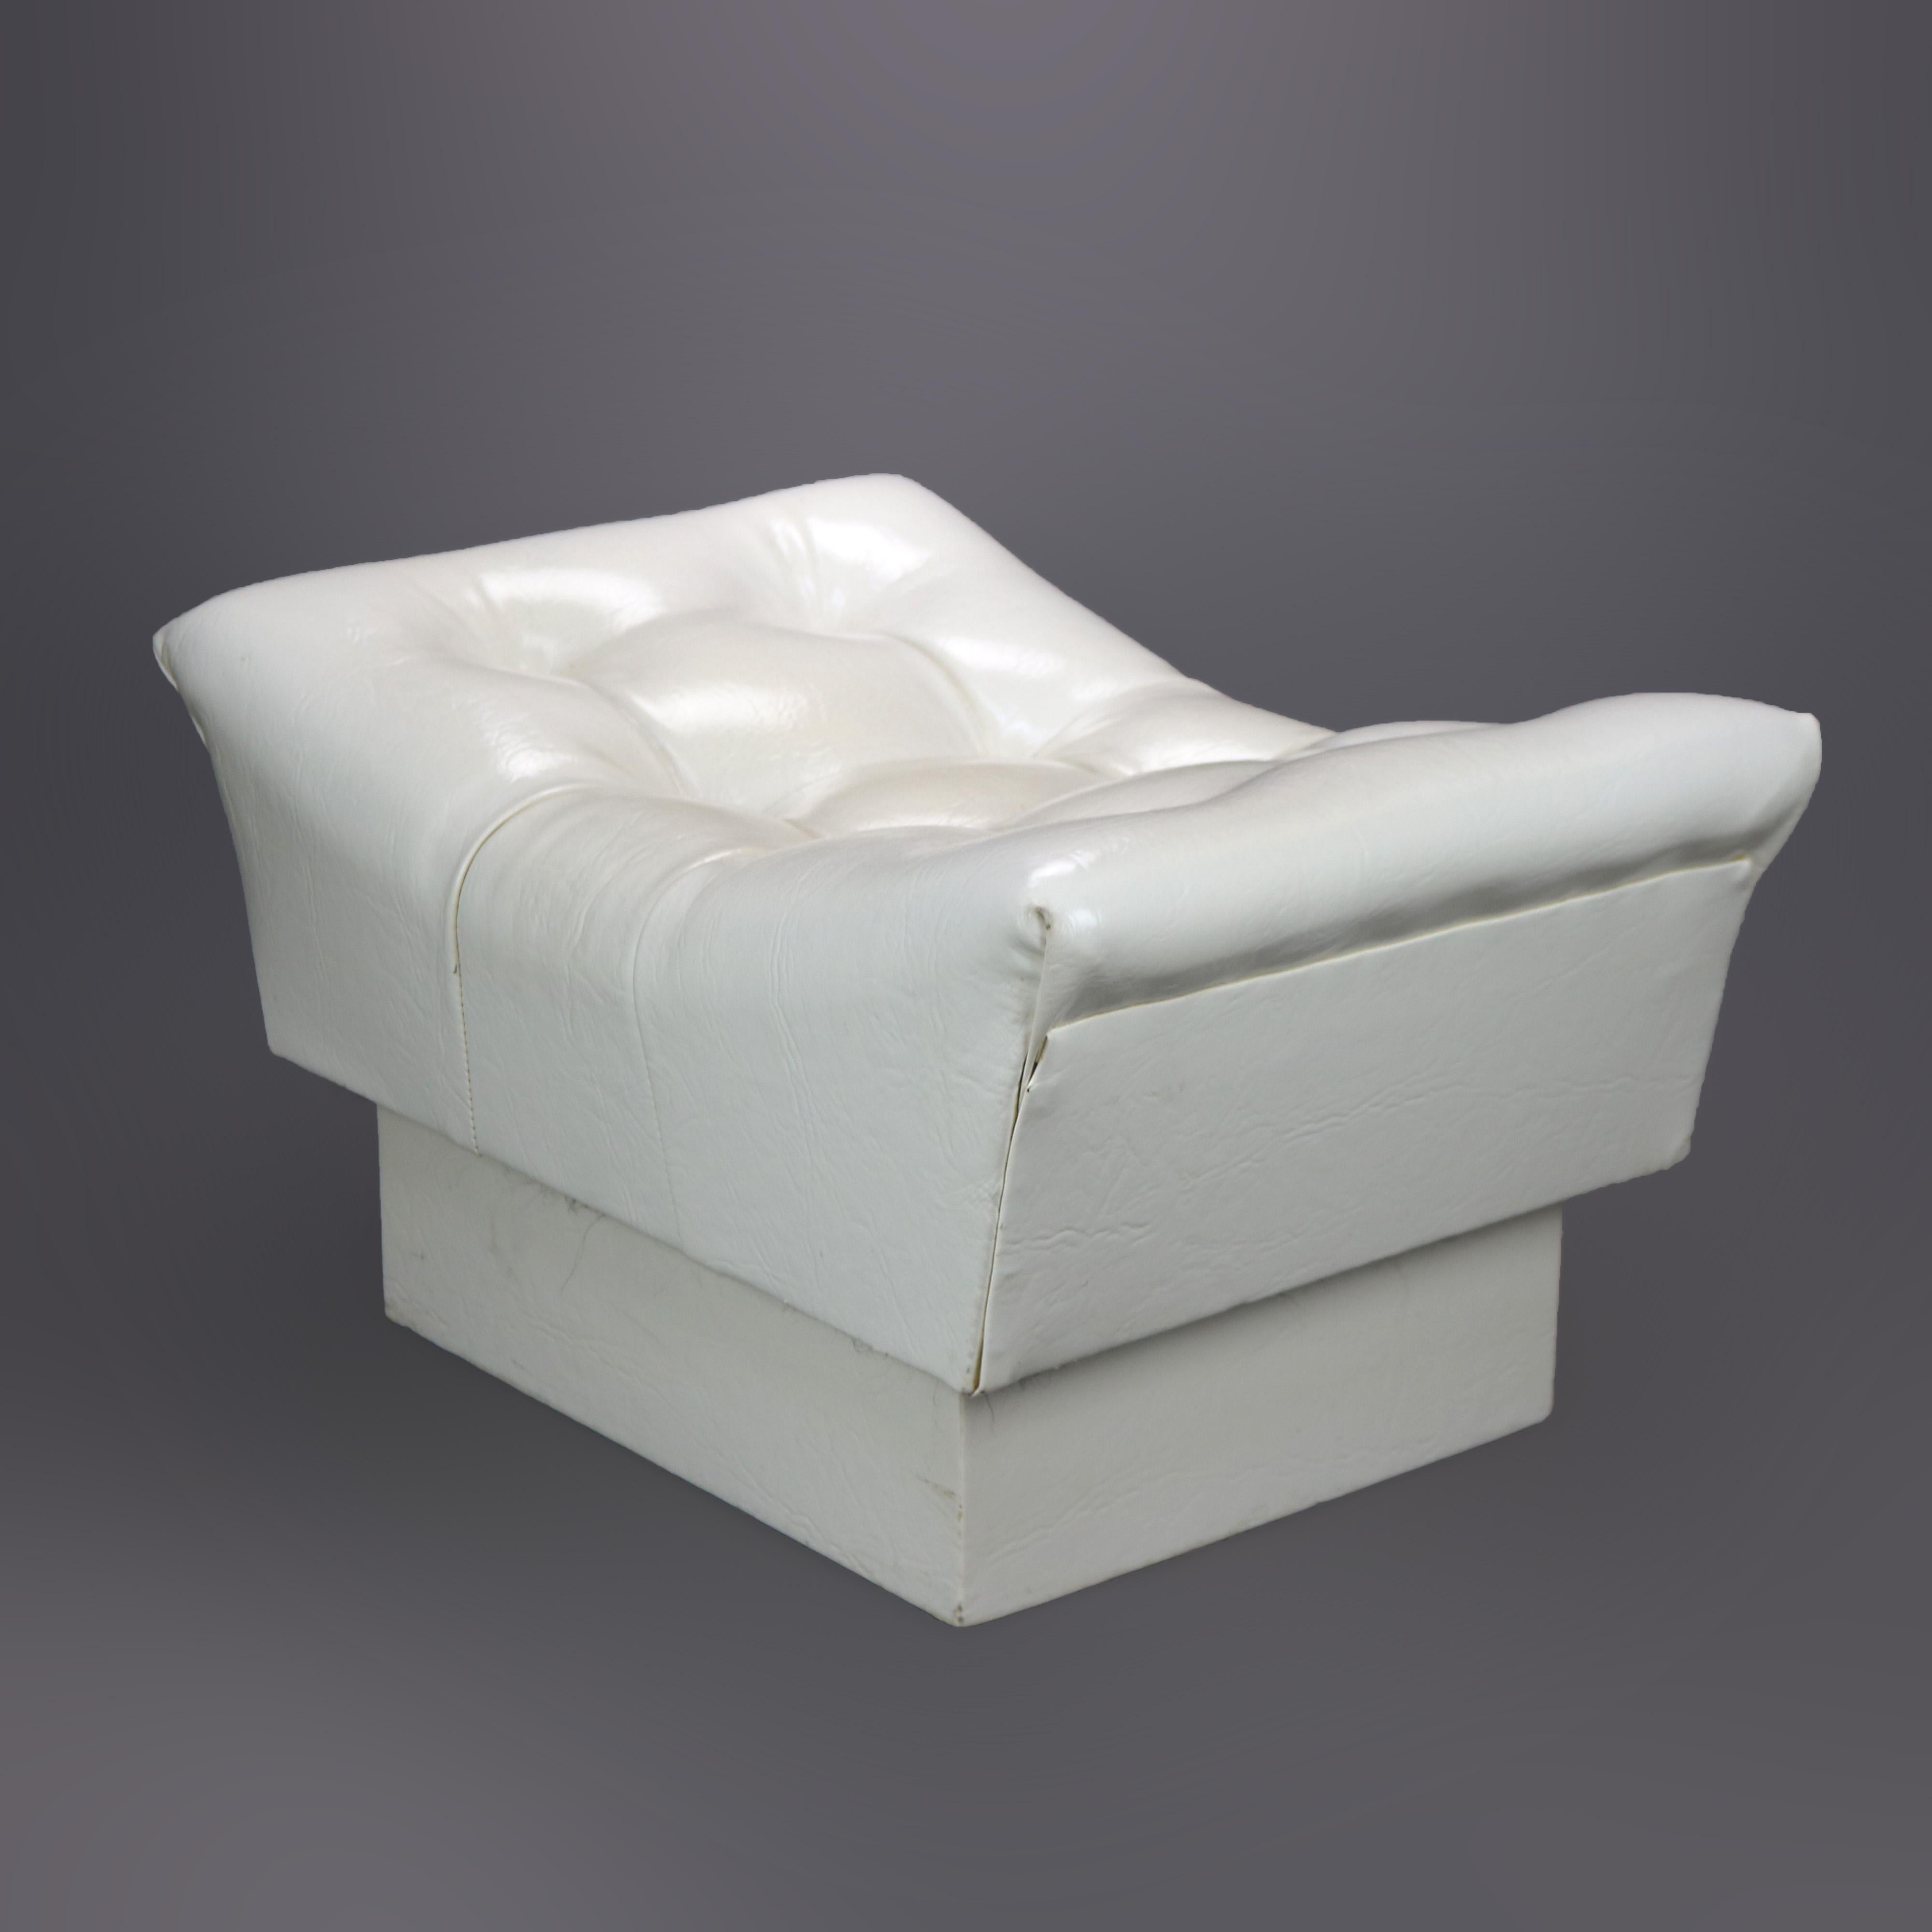 20th Century Mid-Century Modern White Faux Leather Tufted Bench Footstool Circa 1960